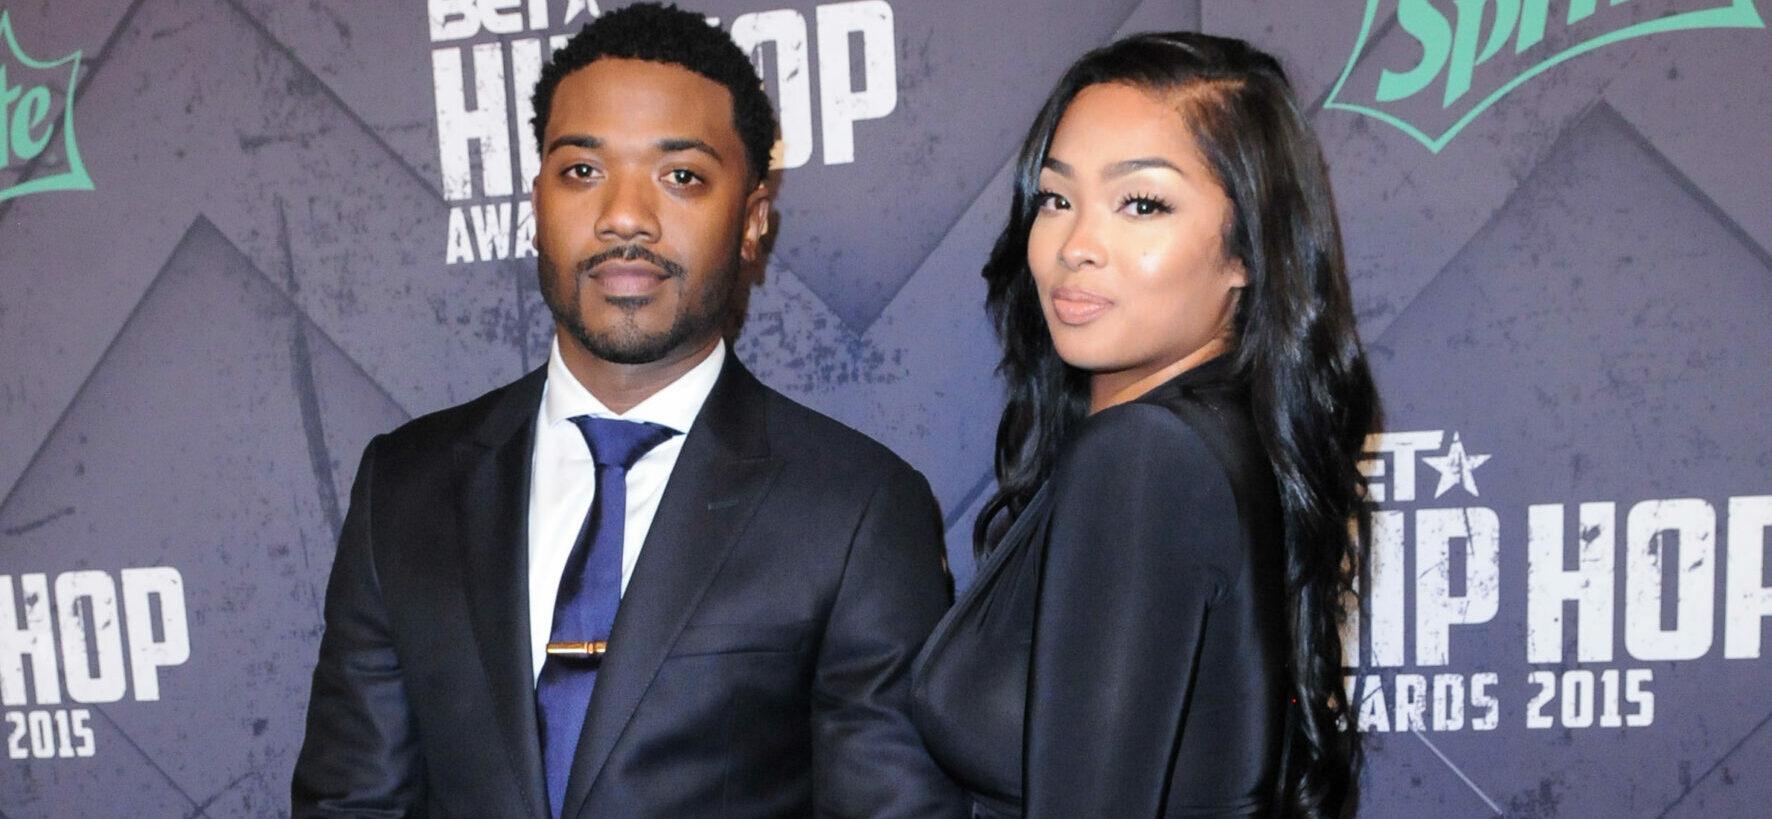 Ray J’s Ex-Wife Princess Love Demands Spousal Support, Joint Custody Of Kids In Divorce